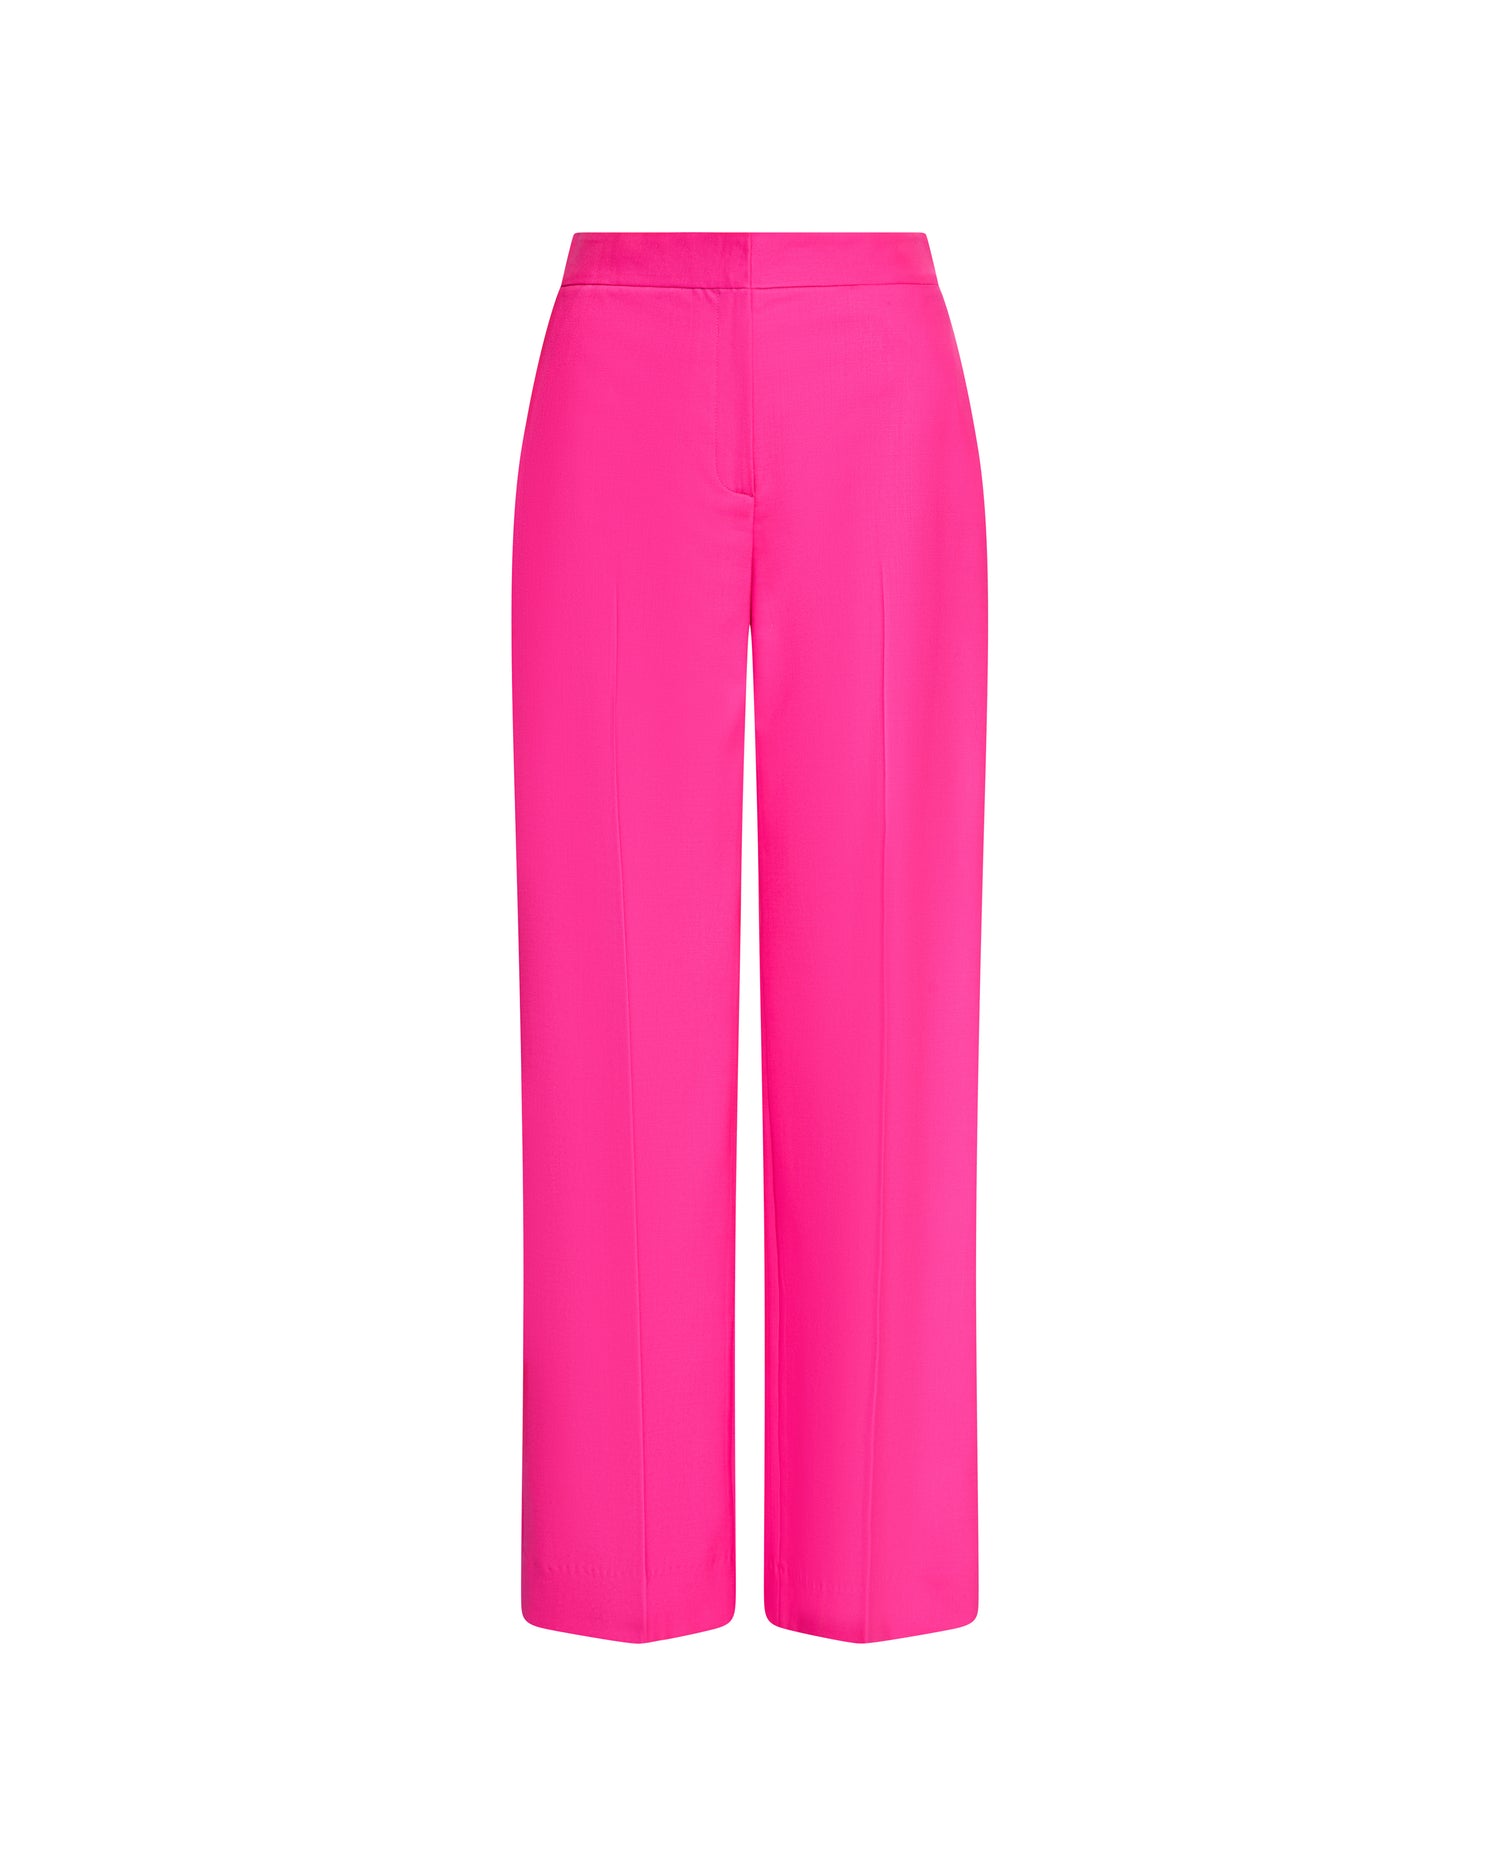 Tailored Womens Fuschia Pink Cropped Plus Size Trousers Size 30 W48 L27.5  A12 | eBay